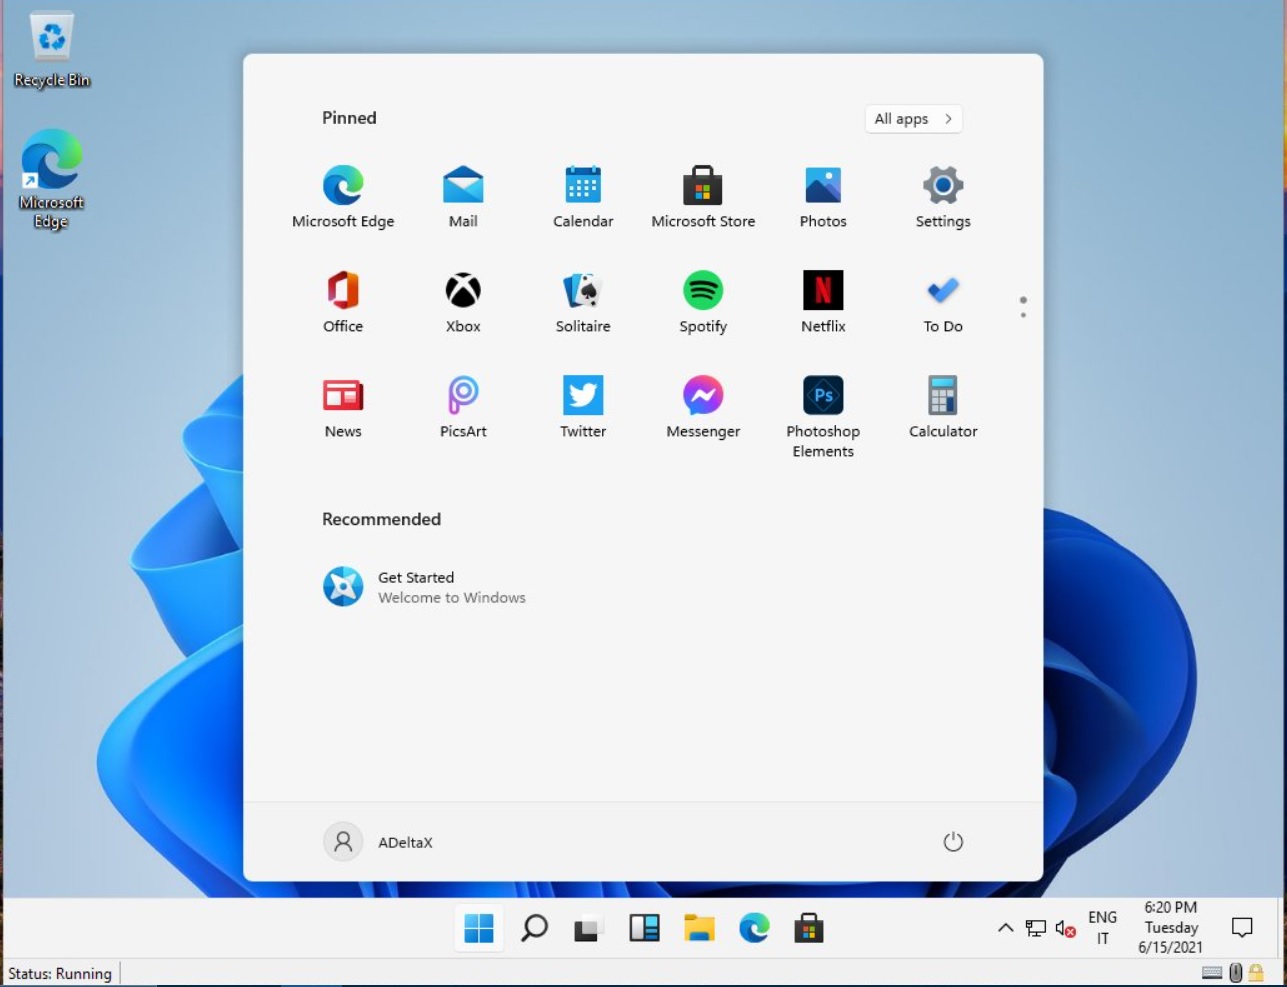 Hate the Windows 11 Start menu? There’s already an app to change it